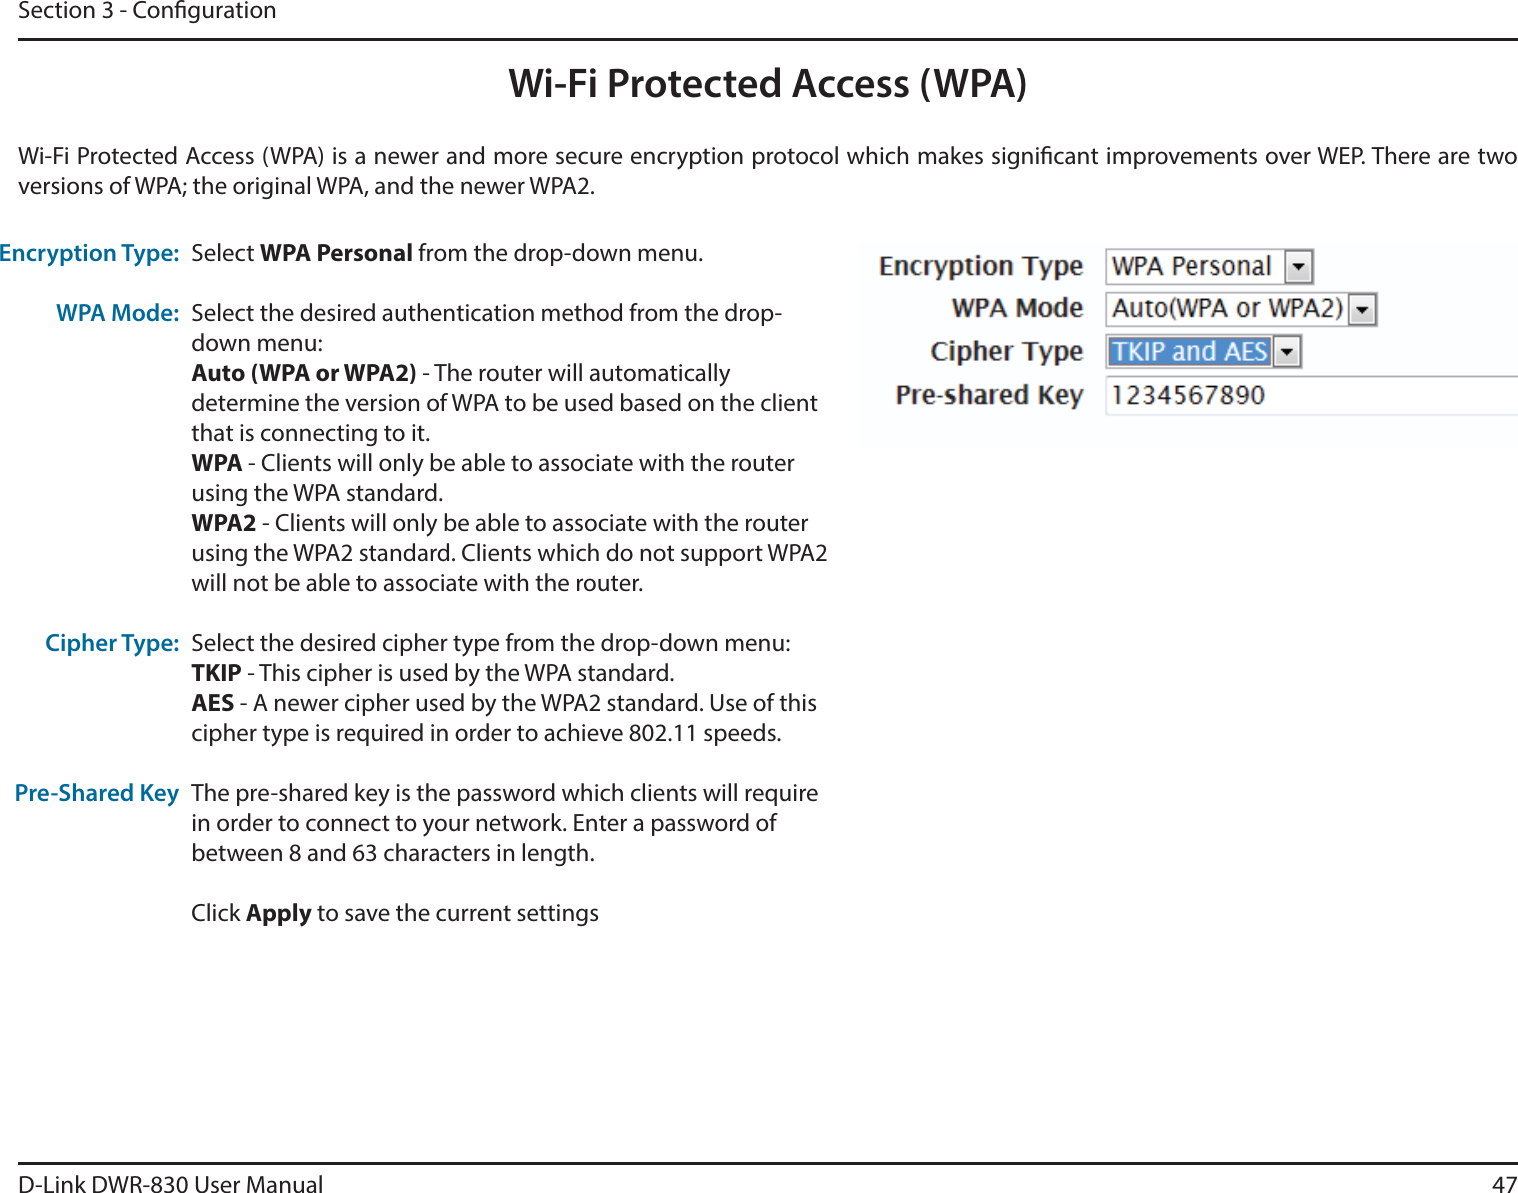 D-Link DWR-830 User Manual 47Section 3 - CongurationWi-Fi Protected Access (WPA)Wi-Fi Protected Access (WPA) is a newer and more secure encryption protocol which makes signicant improvements over WEP. There are two versions of WPA; the original WPA, and the newer WPA2. Encryption Type:WPA Mode:Cipher Type:Pre-Shared KeySelect WPA Personal from the drop-down menu.Select the desired authentication method from the drop-down menu:Auto (WPA or WPA2) - The router will automatically determine the version of WPA to be used based on the client that is connecting to it. WPA - Clients will only be able to associate with the router using the WPA standard. WPA2 - Clients will only be able to associate with the router using the WPA2 standard. Clients which do not support WPA2 will not be able to associate with the router. Select the desired cipher type from the drop-down menu:TKIP - This cipher is used by the WPA standard. AES - A newer cipher used by the WPA2 standard. Use of this cipher type is required in order to achieve 802.11 speeds. The pre-shared key is the password which clients will require in order to connect to your network. Enter a password of between 8 and 63 characters in length. Click Apply to save the current settings